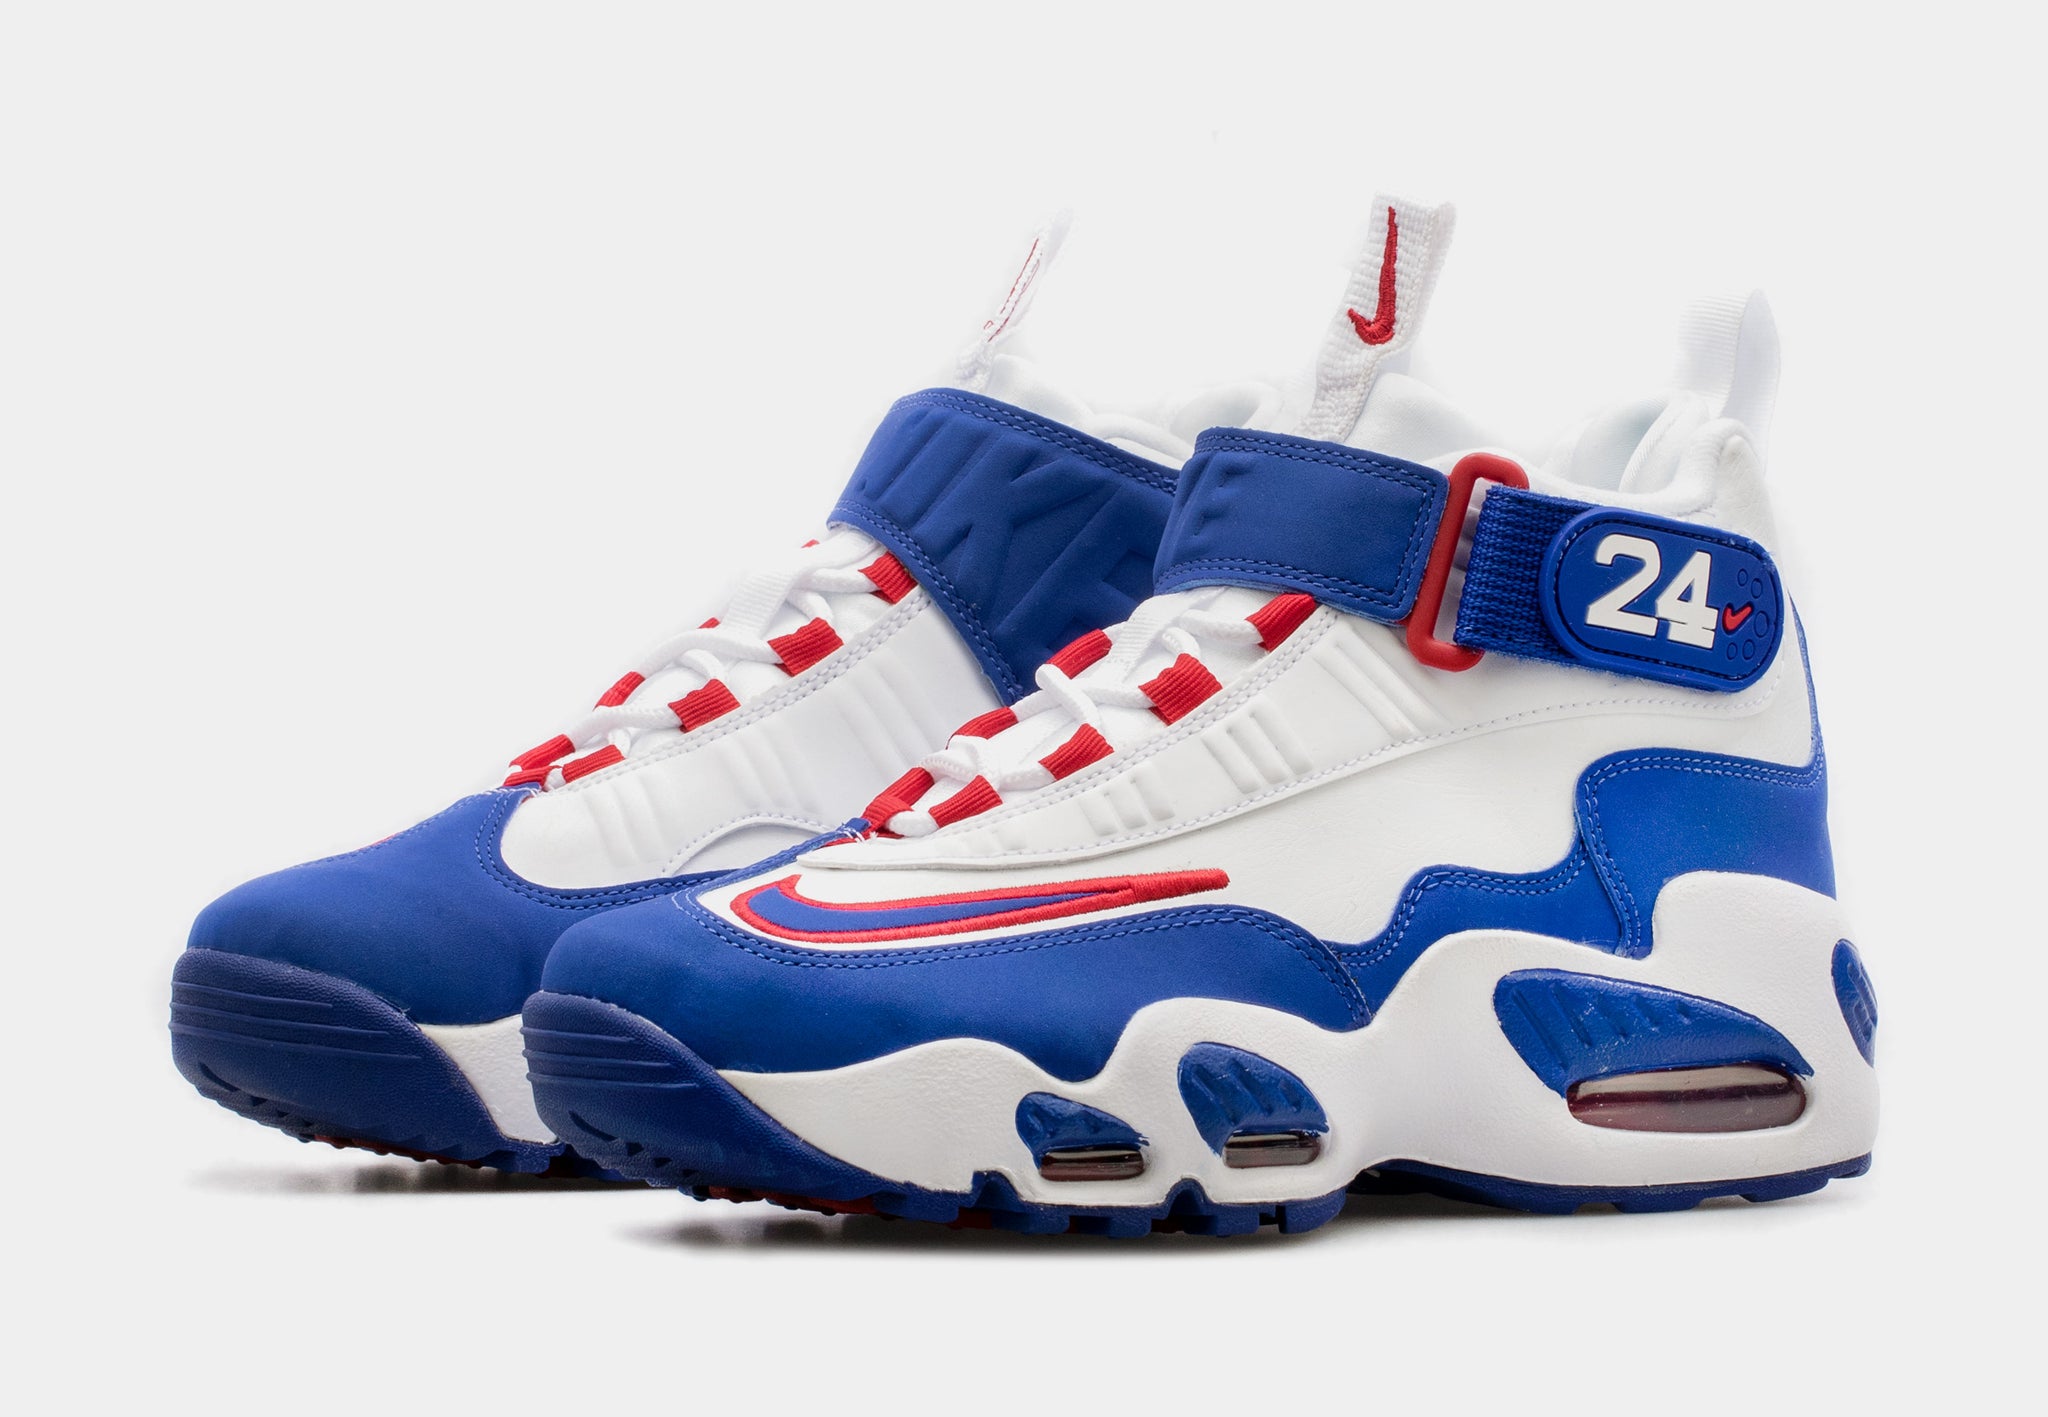 Nike Air Griffey Max 1 Grade School Lifestyle Shoes Blue White DX3724-100 –  Shoe Palace